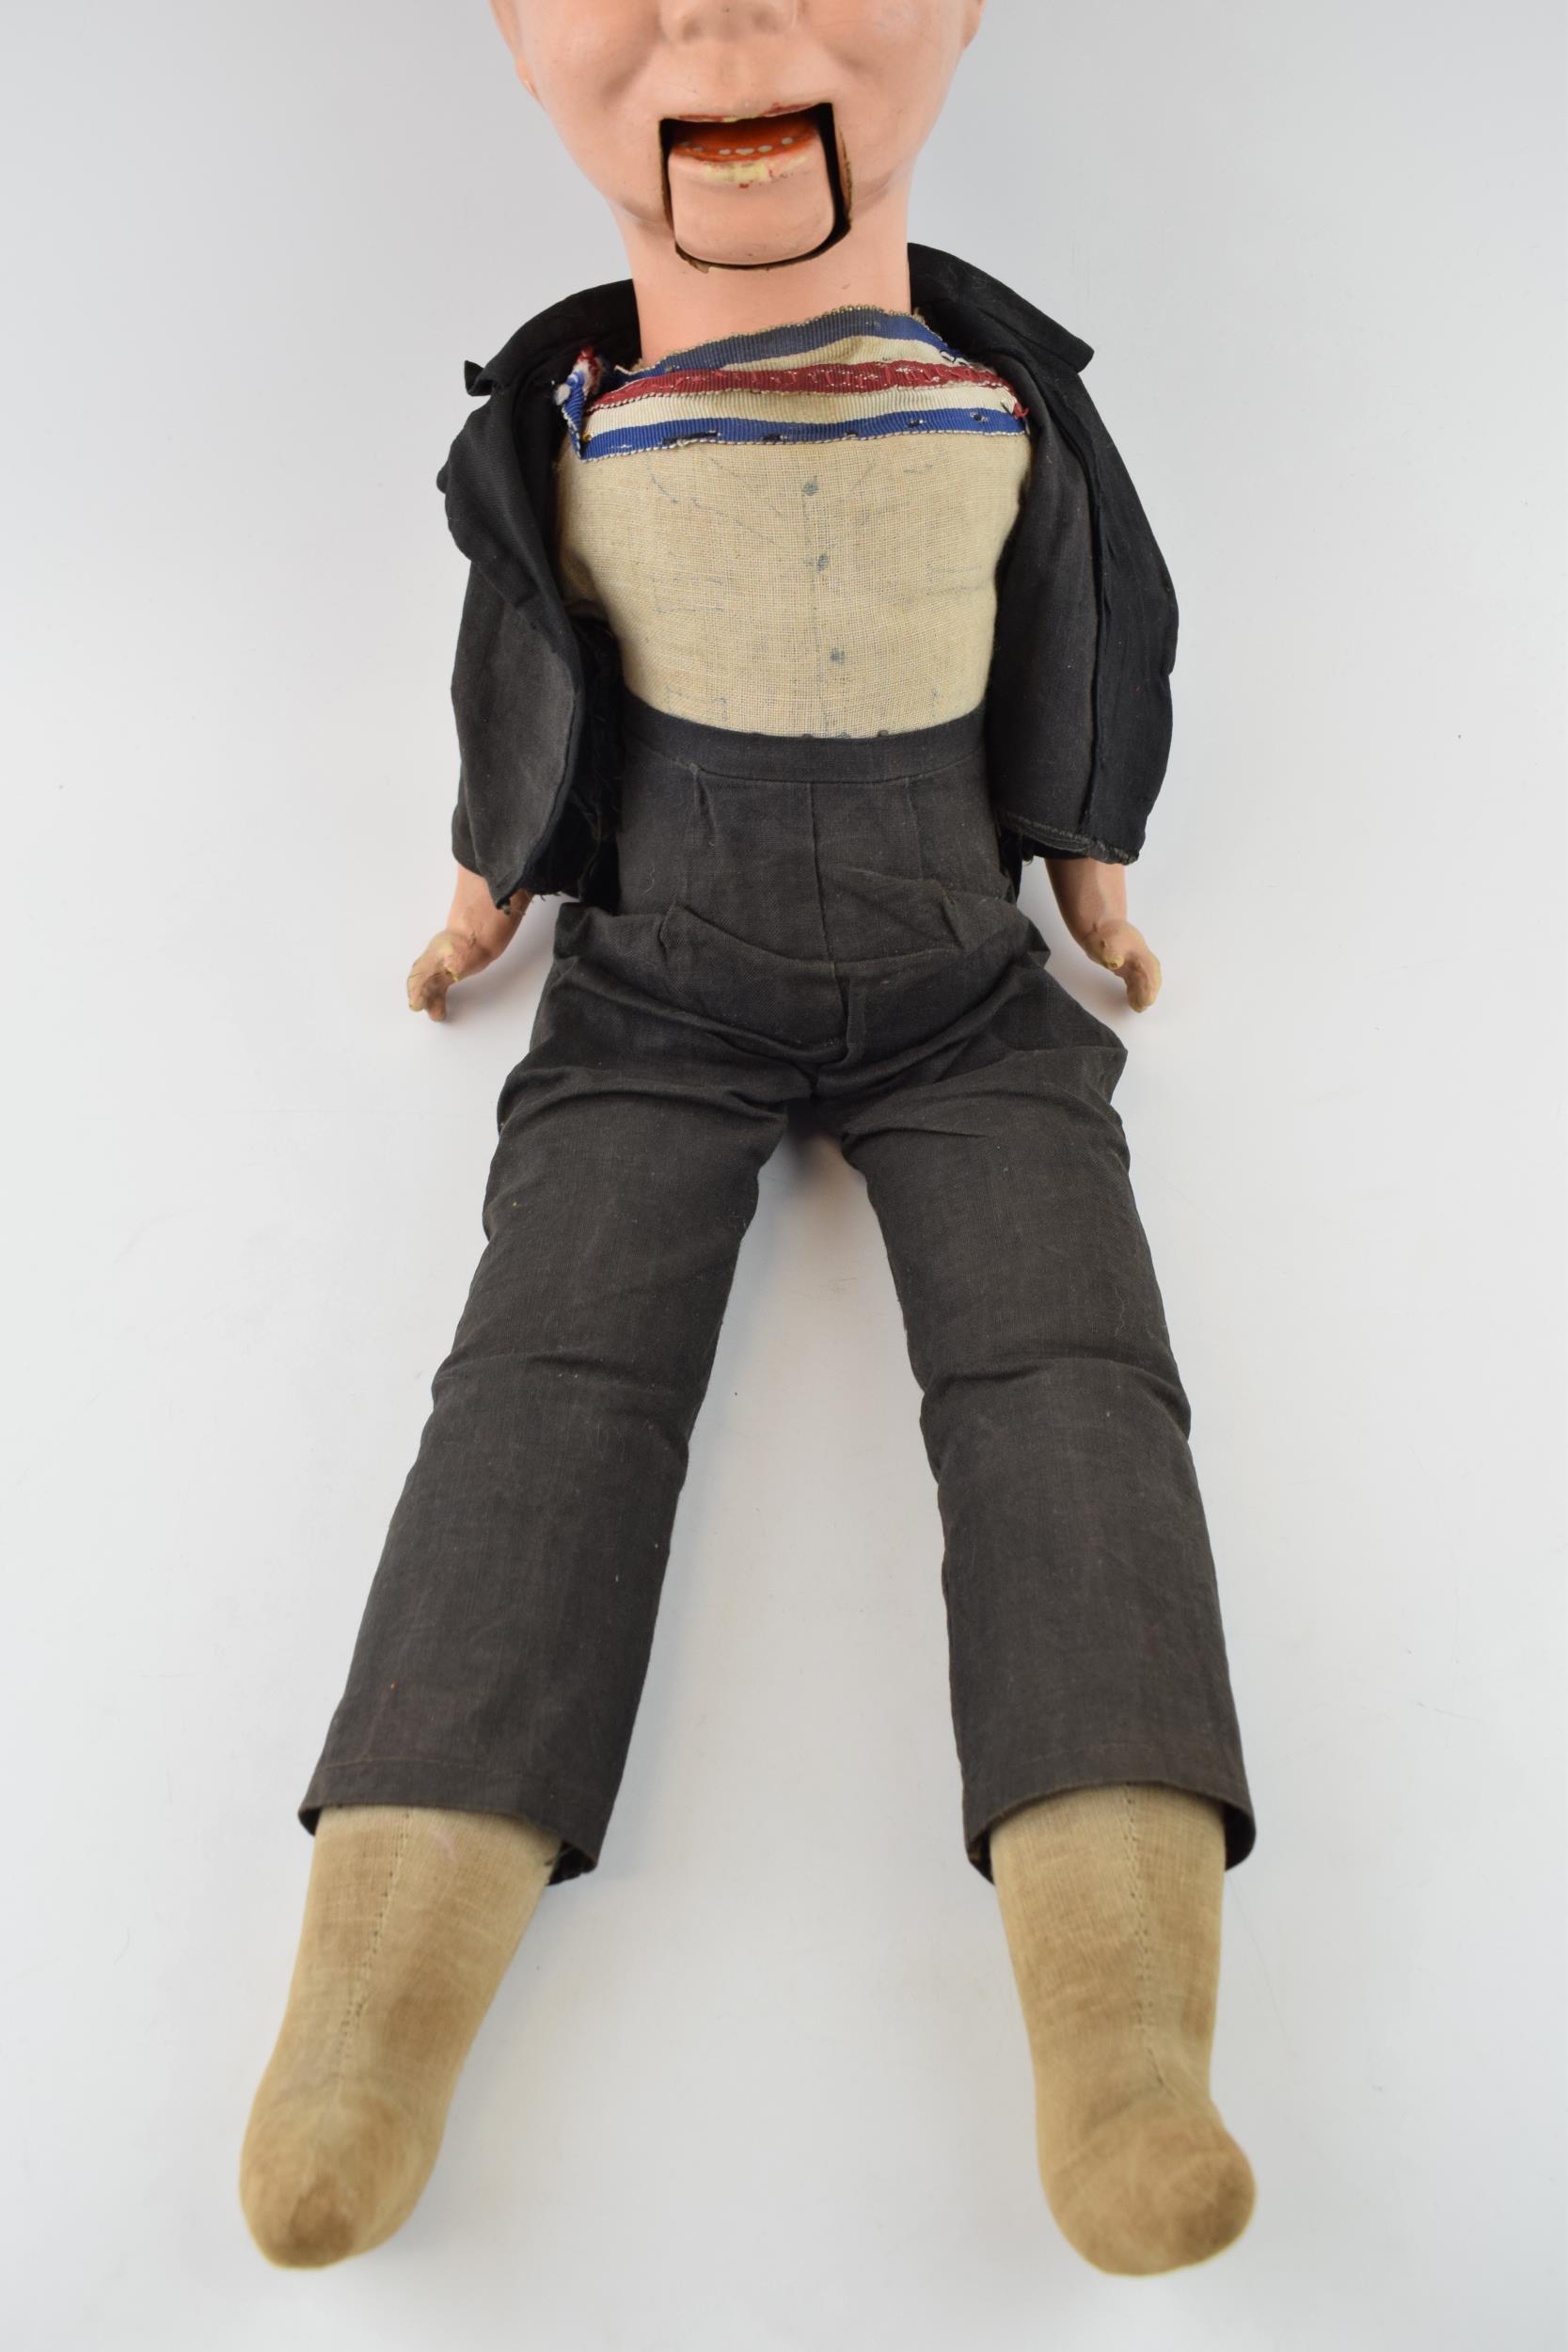 'Charly McCarthy' ventriloquists dummy doll c1930s. Reliable Toys, Canada. Height 59cm. Original - Image 3 of 5